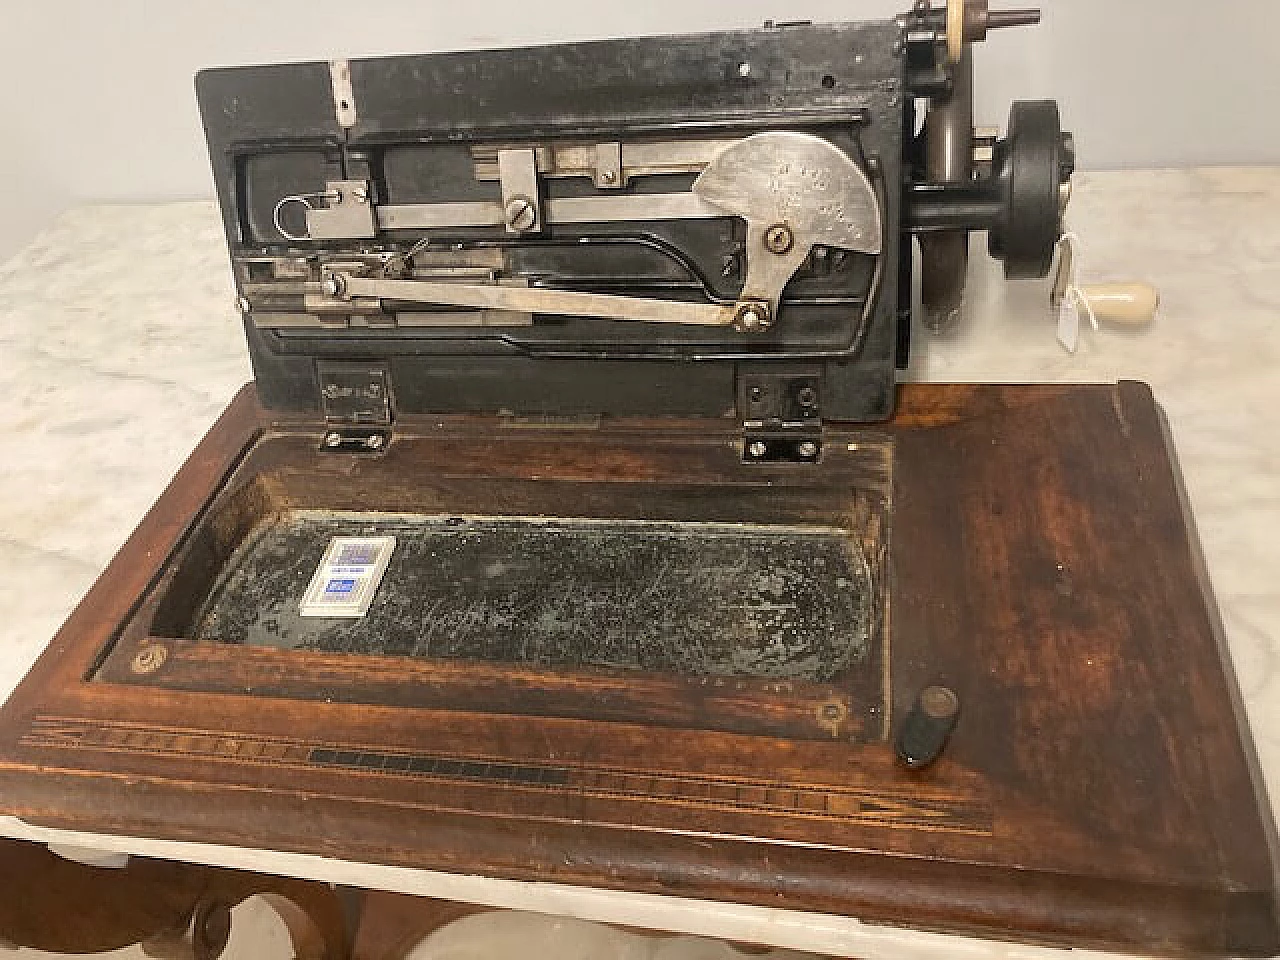 Tabletop sewing machine with mother-of-pearl inlays, late 19th century 15